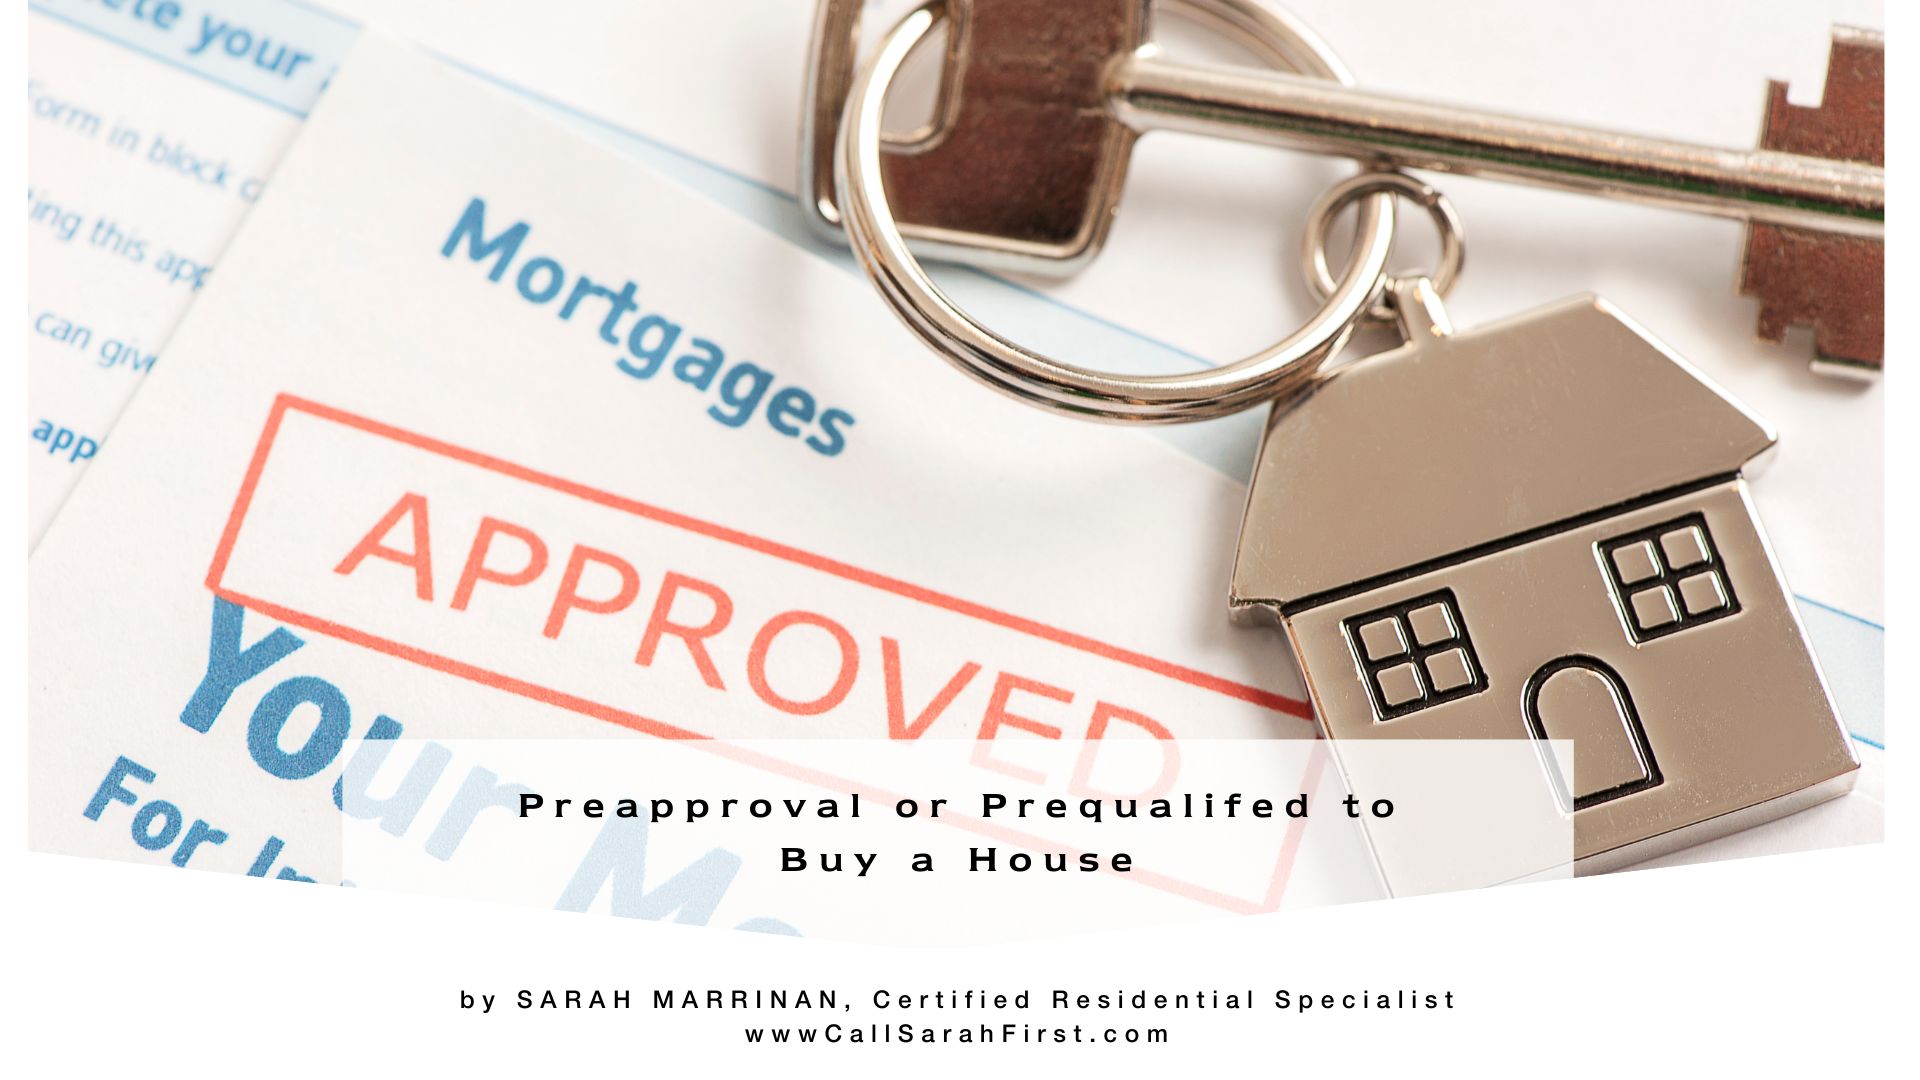 Preapproval or Prequalifed to Buy a House